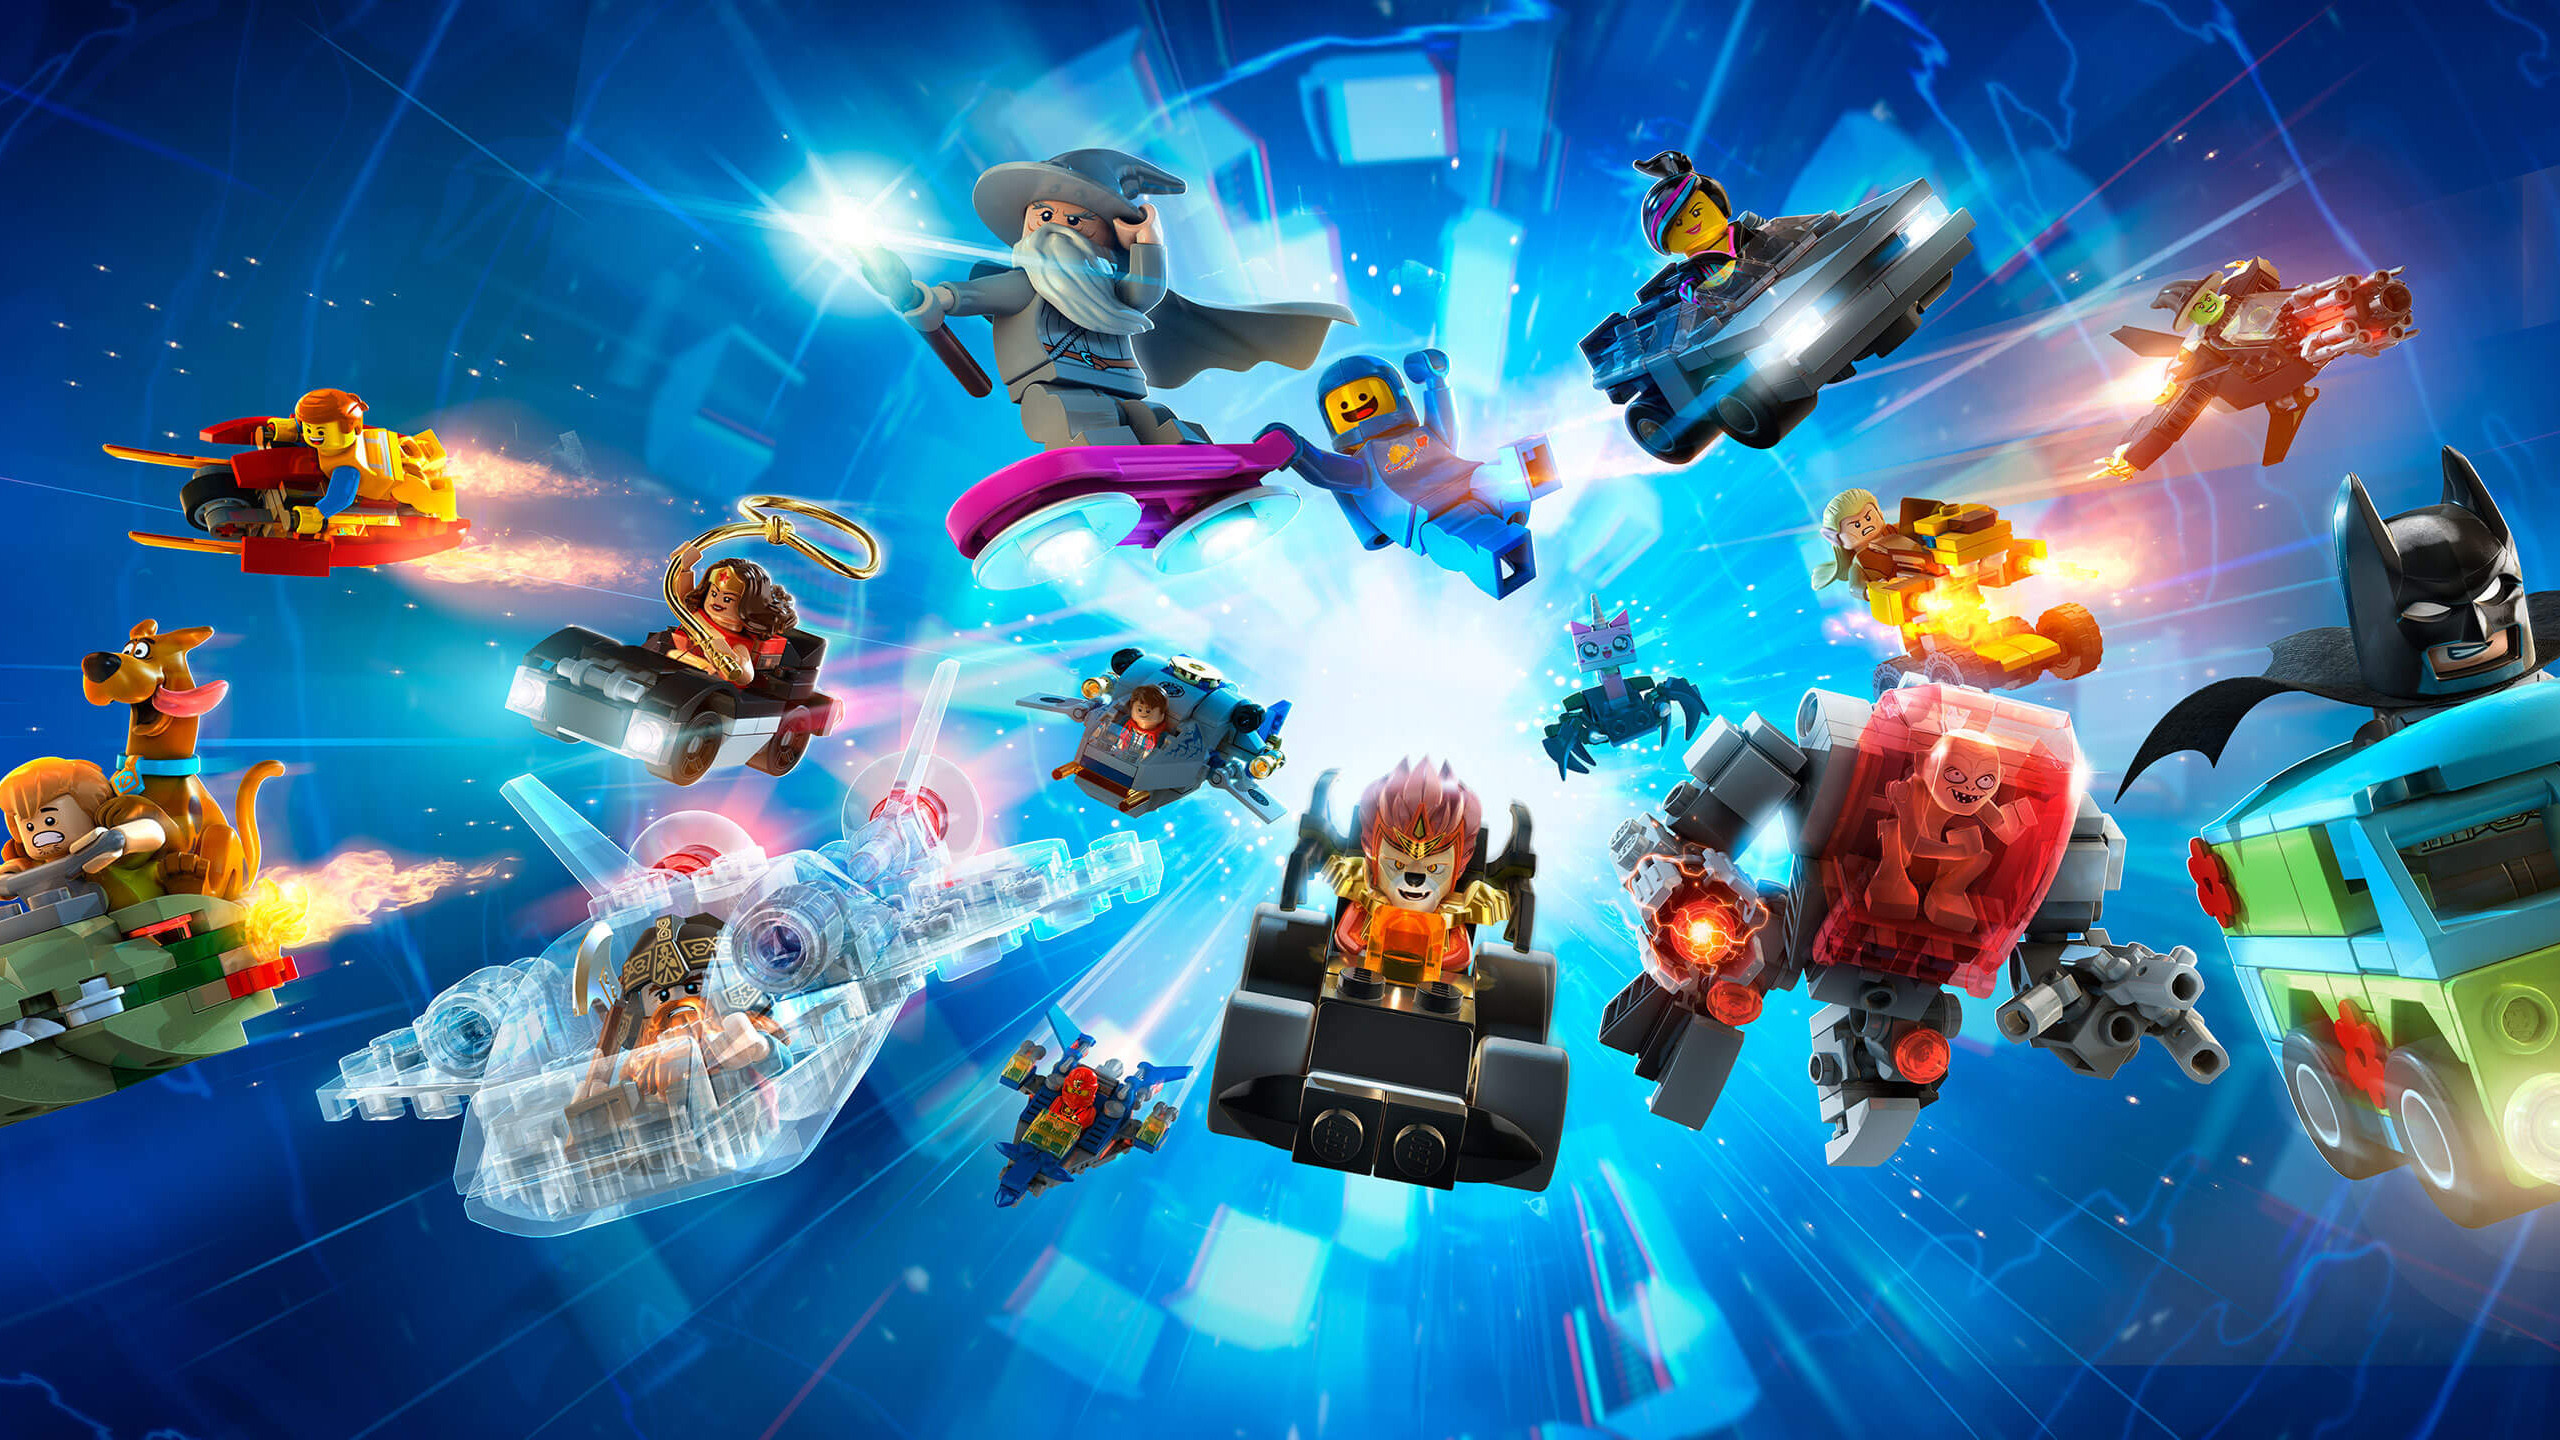 Lego dimensions game HD wallpapers